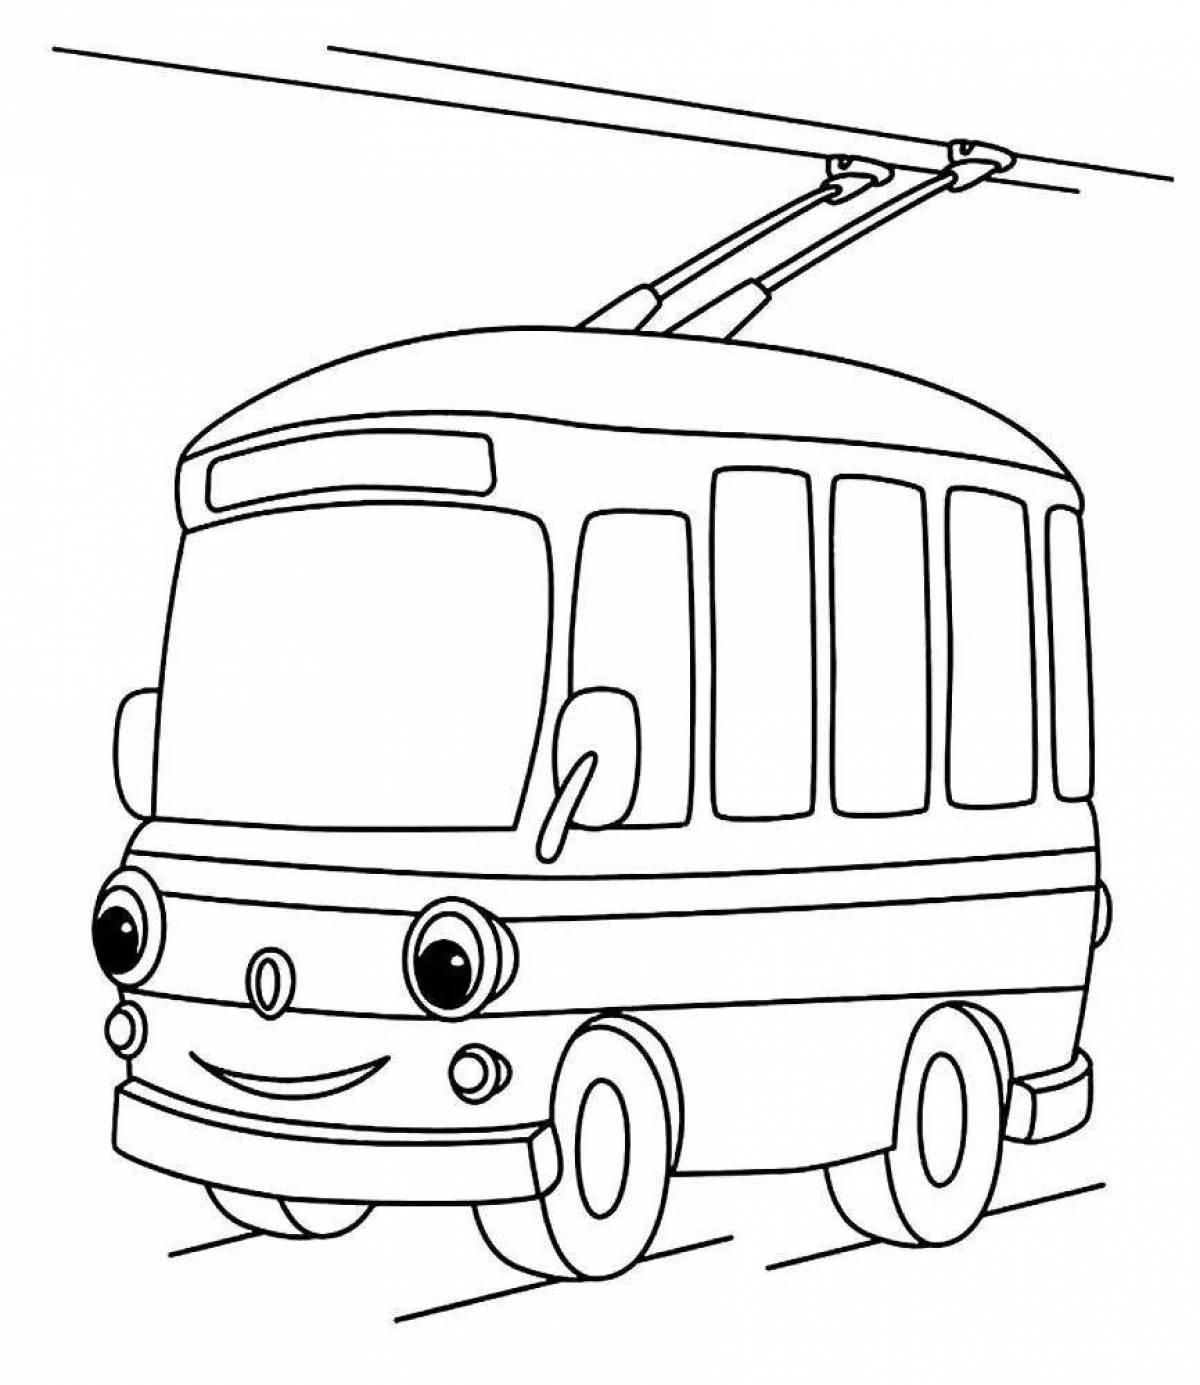 Coloring page cute transport